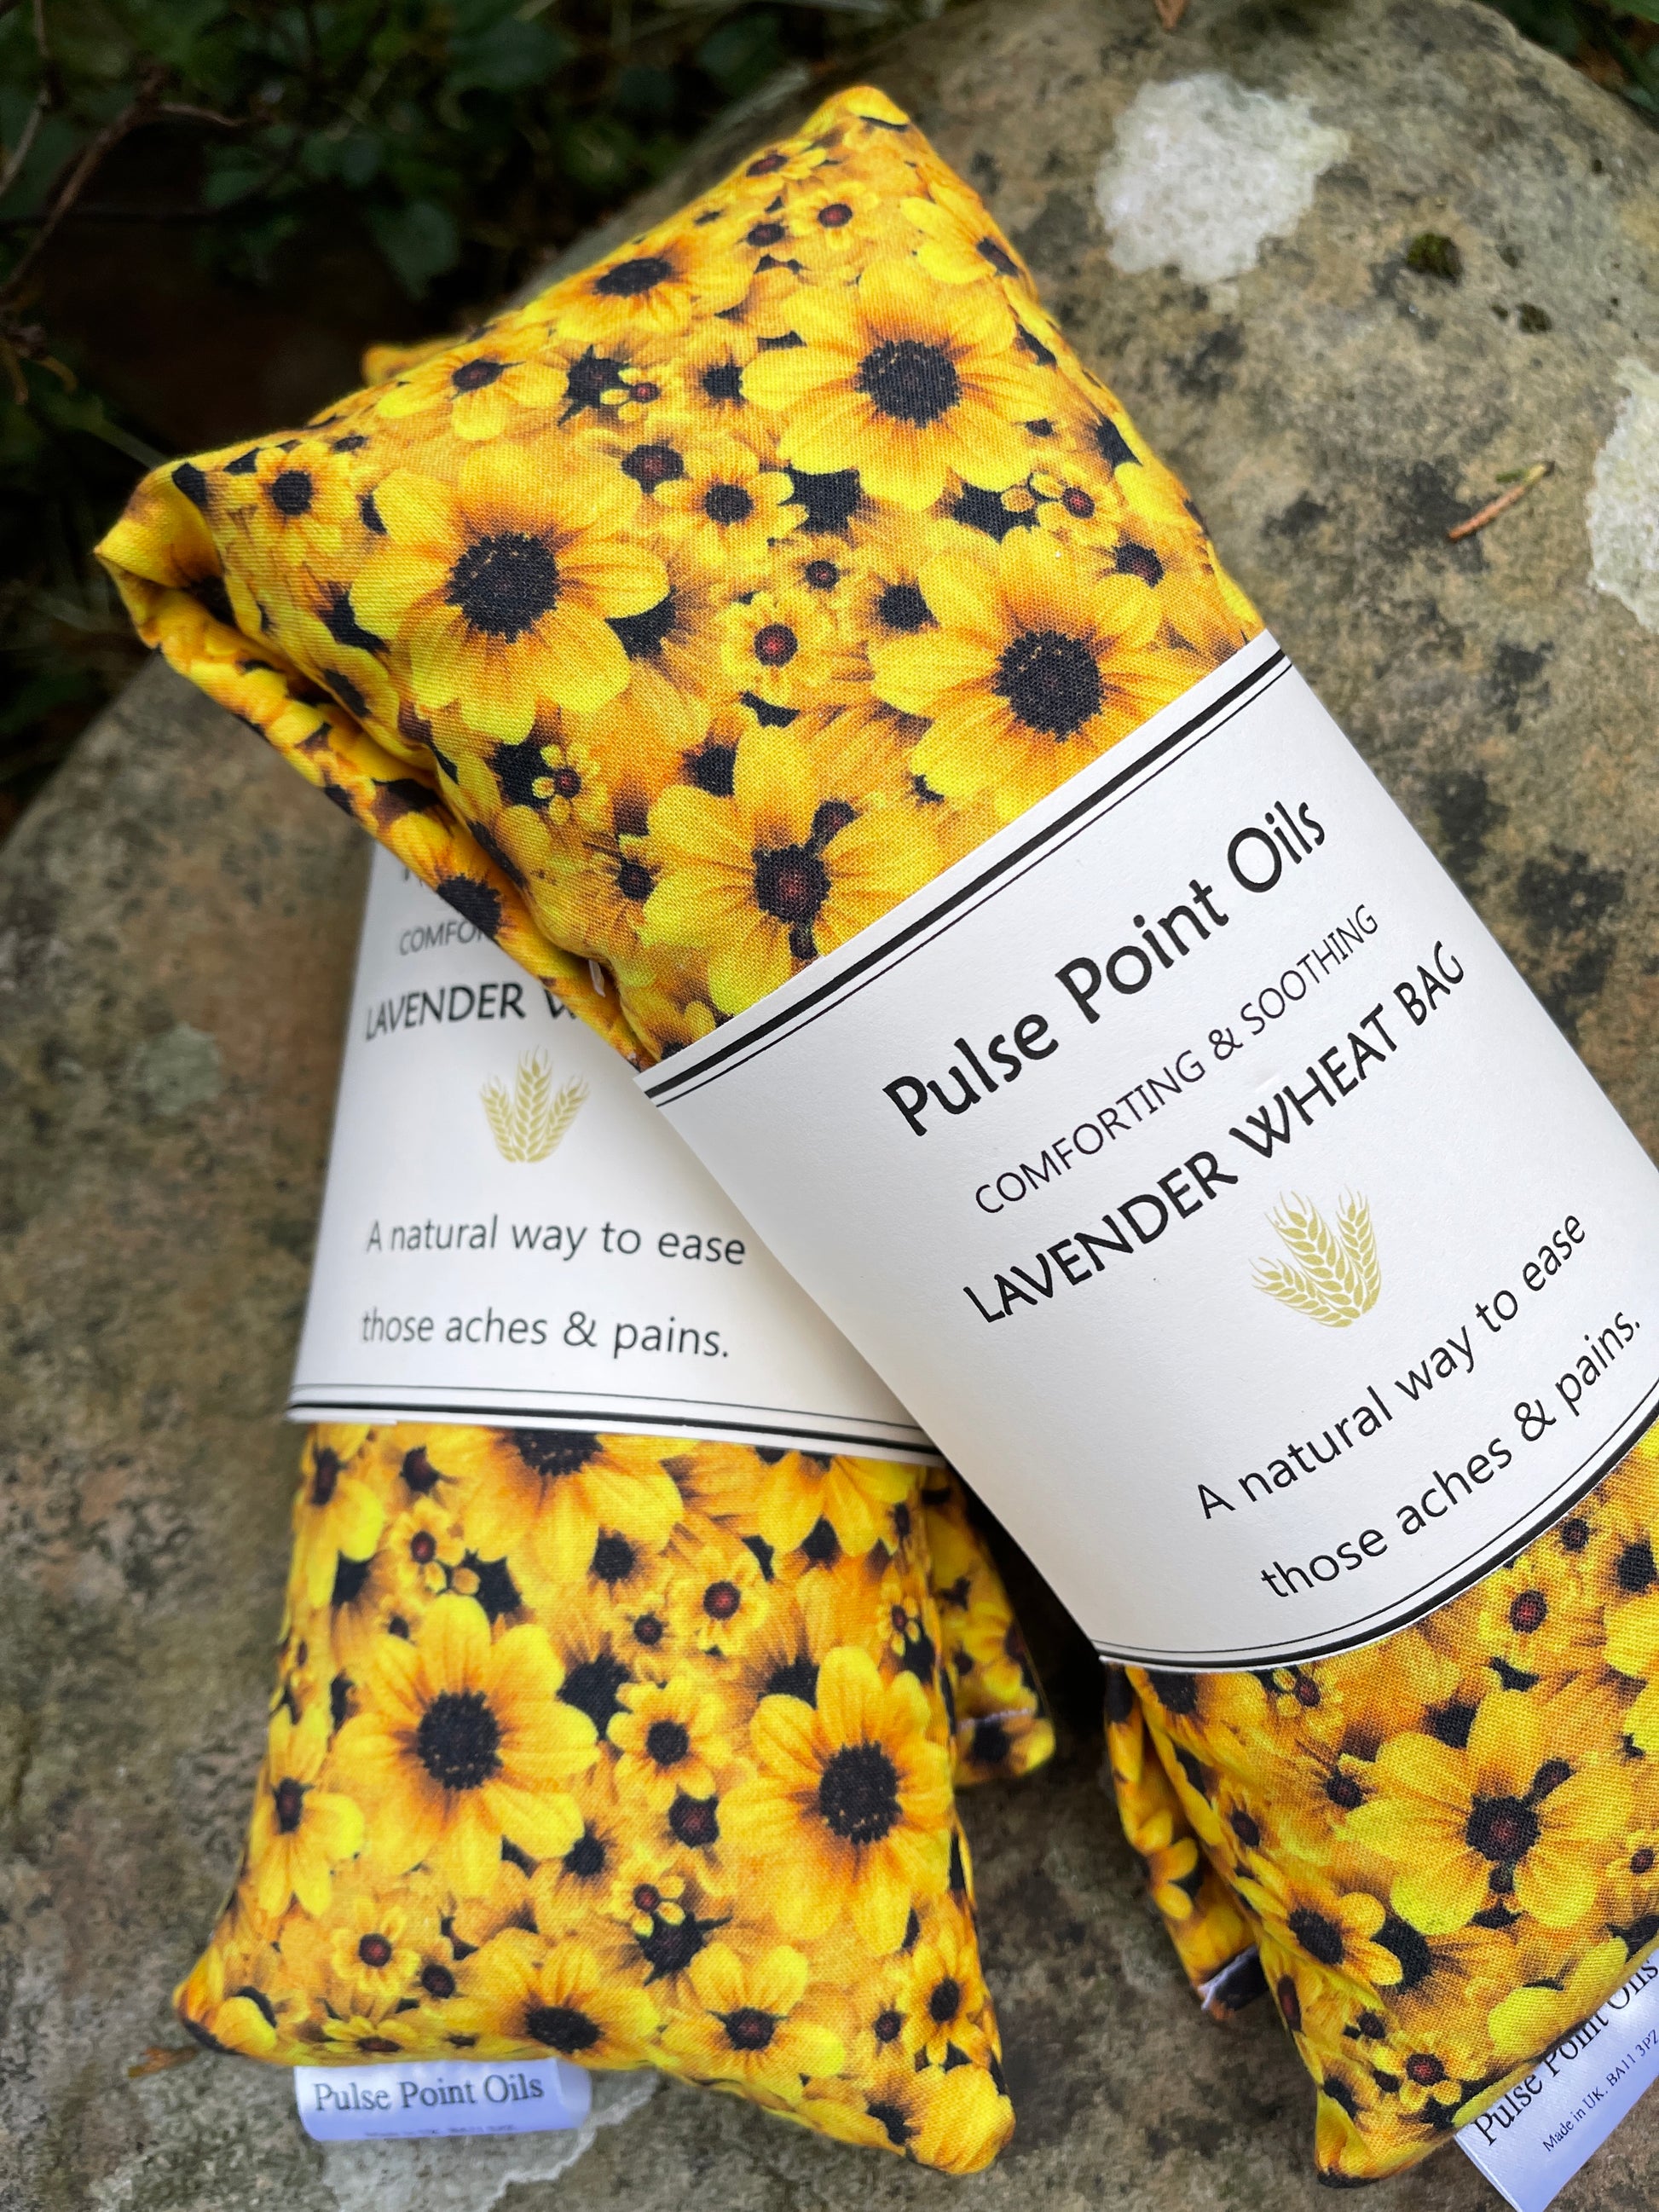 Pair of sunflower printed lavender scented wheat bags handcrafted by WheatBagHeaven. Use for pain relief or comforting relaxation gift